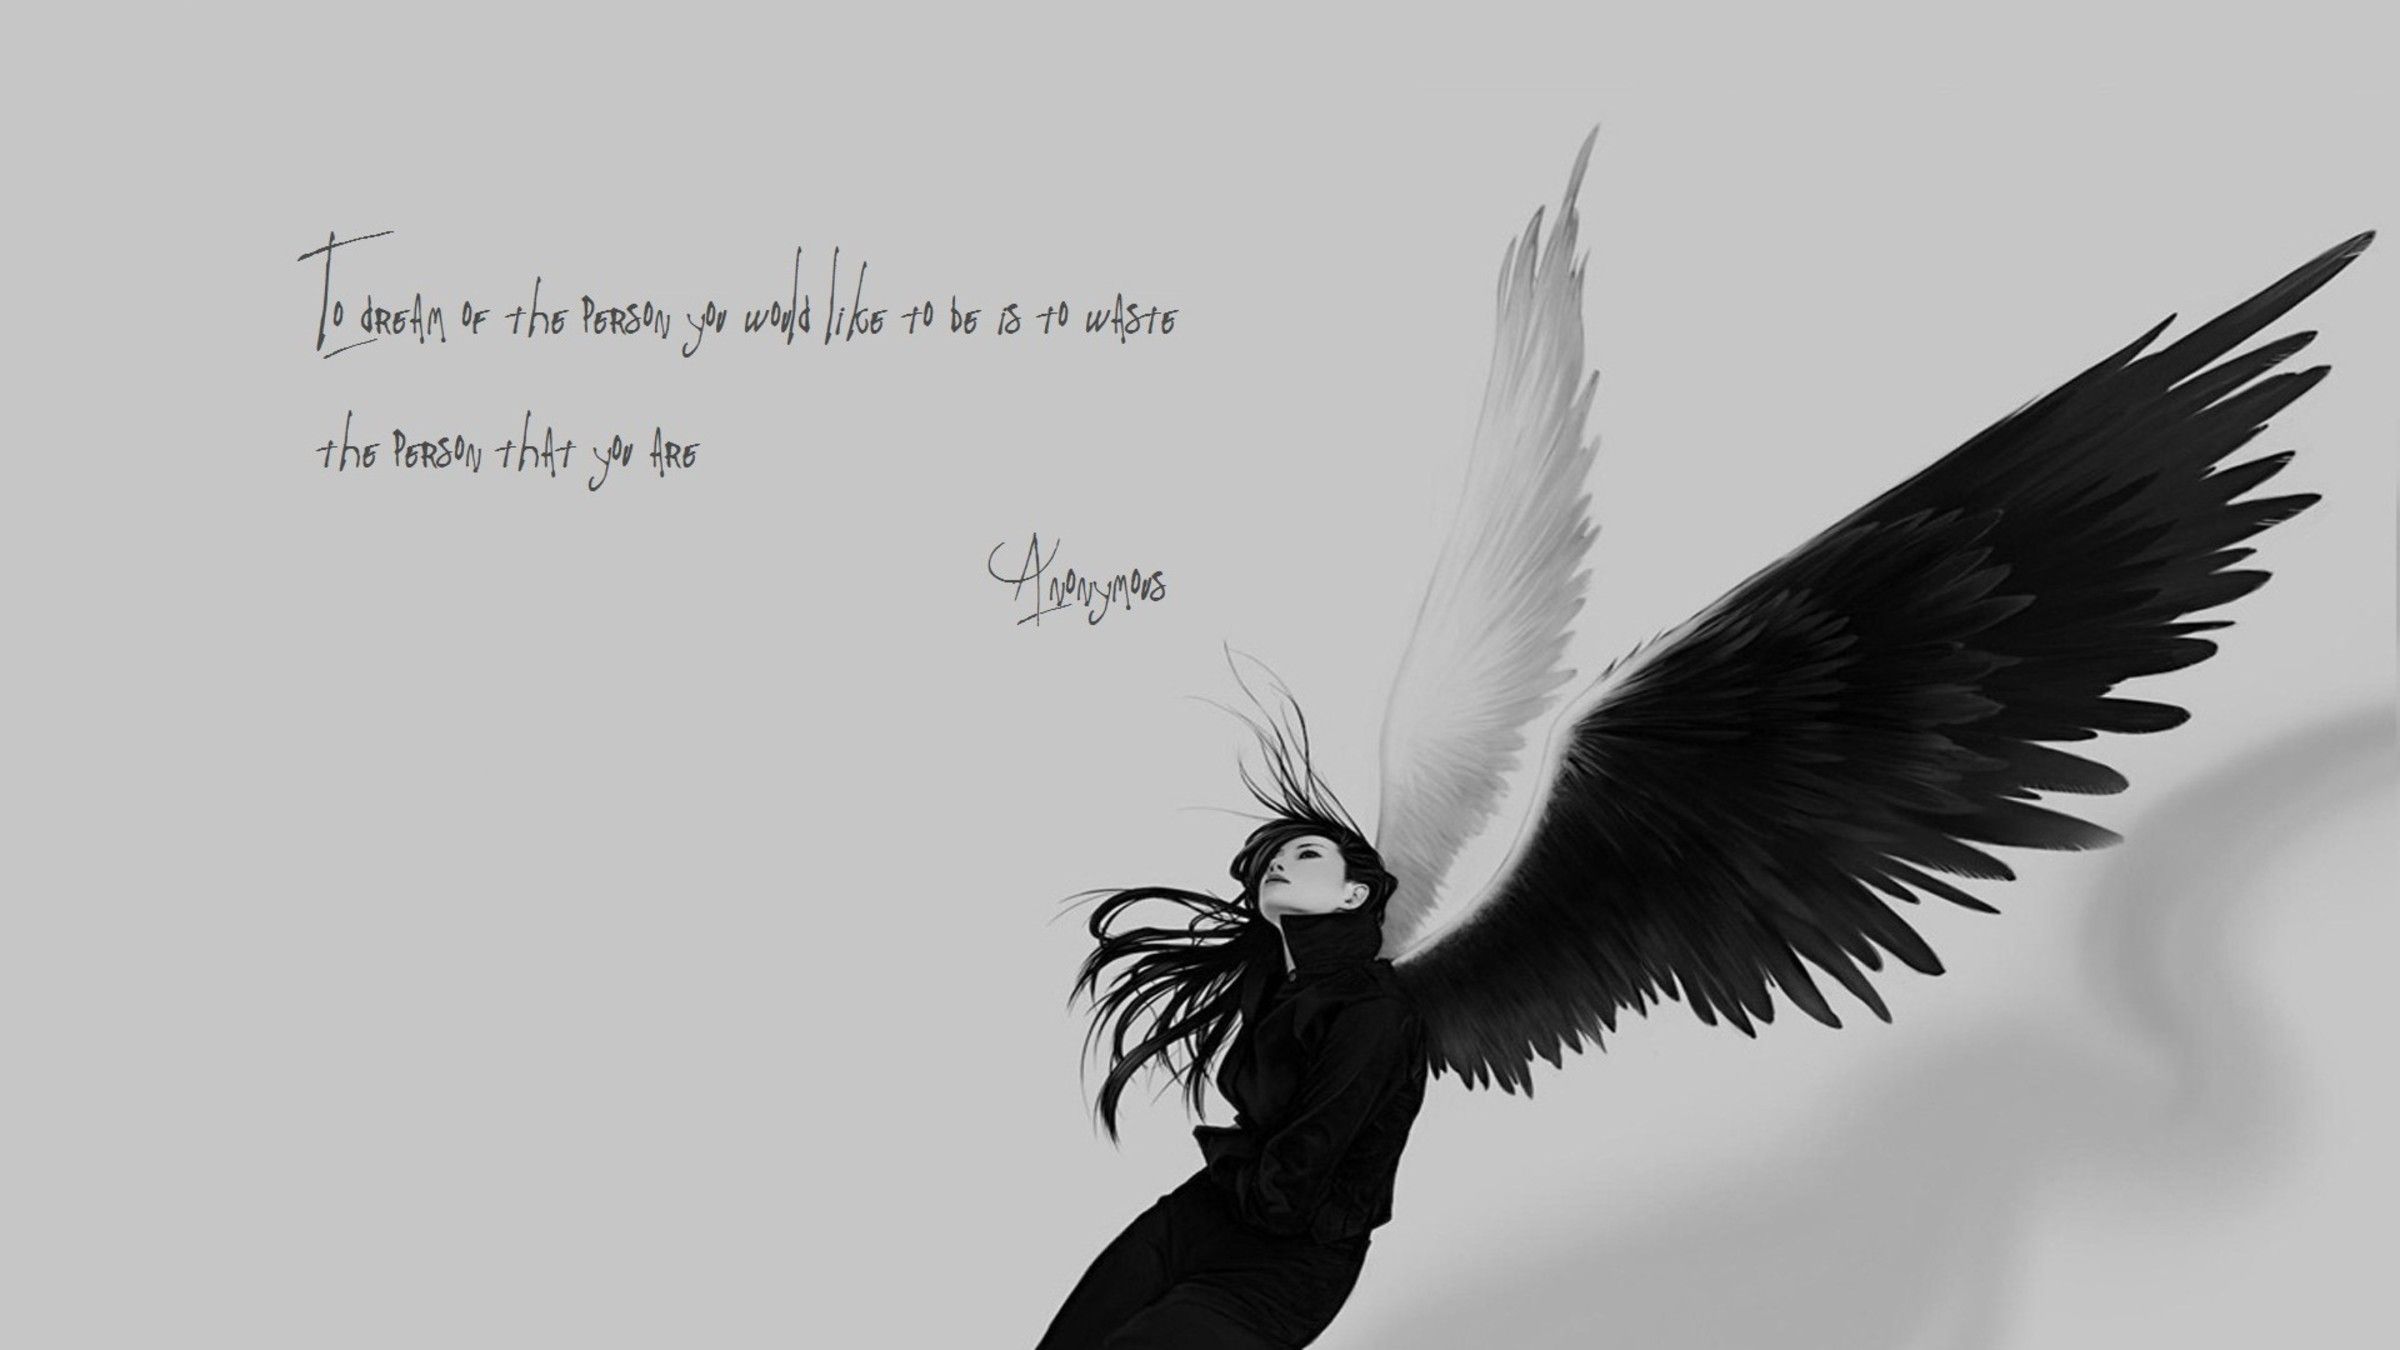 Wallpaper.wiki Anonymous Angels Monochrome Quotes Sad 2400×1350